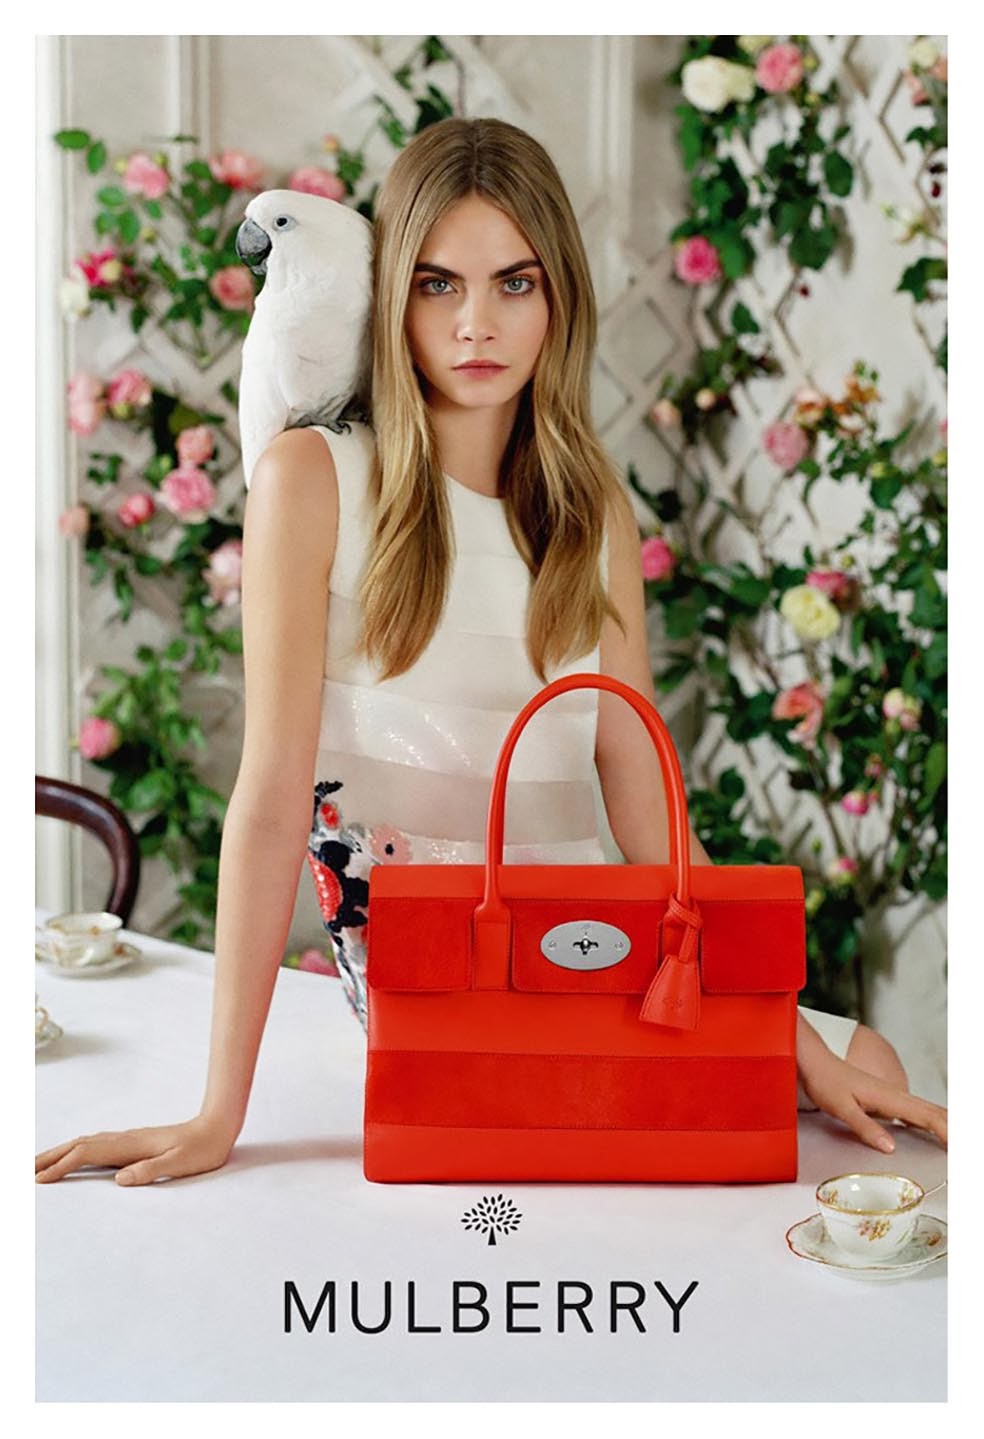 Kiwi's Angels: Cara Delevingne with cockatoo for Mulberry's SS14 campaign